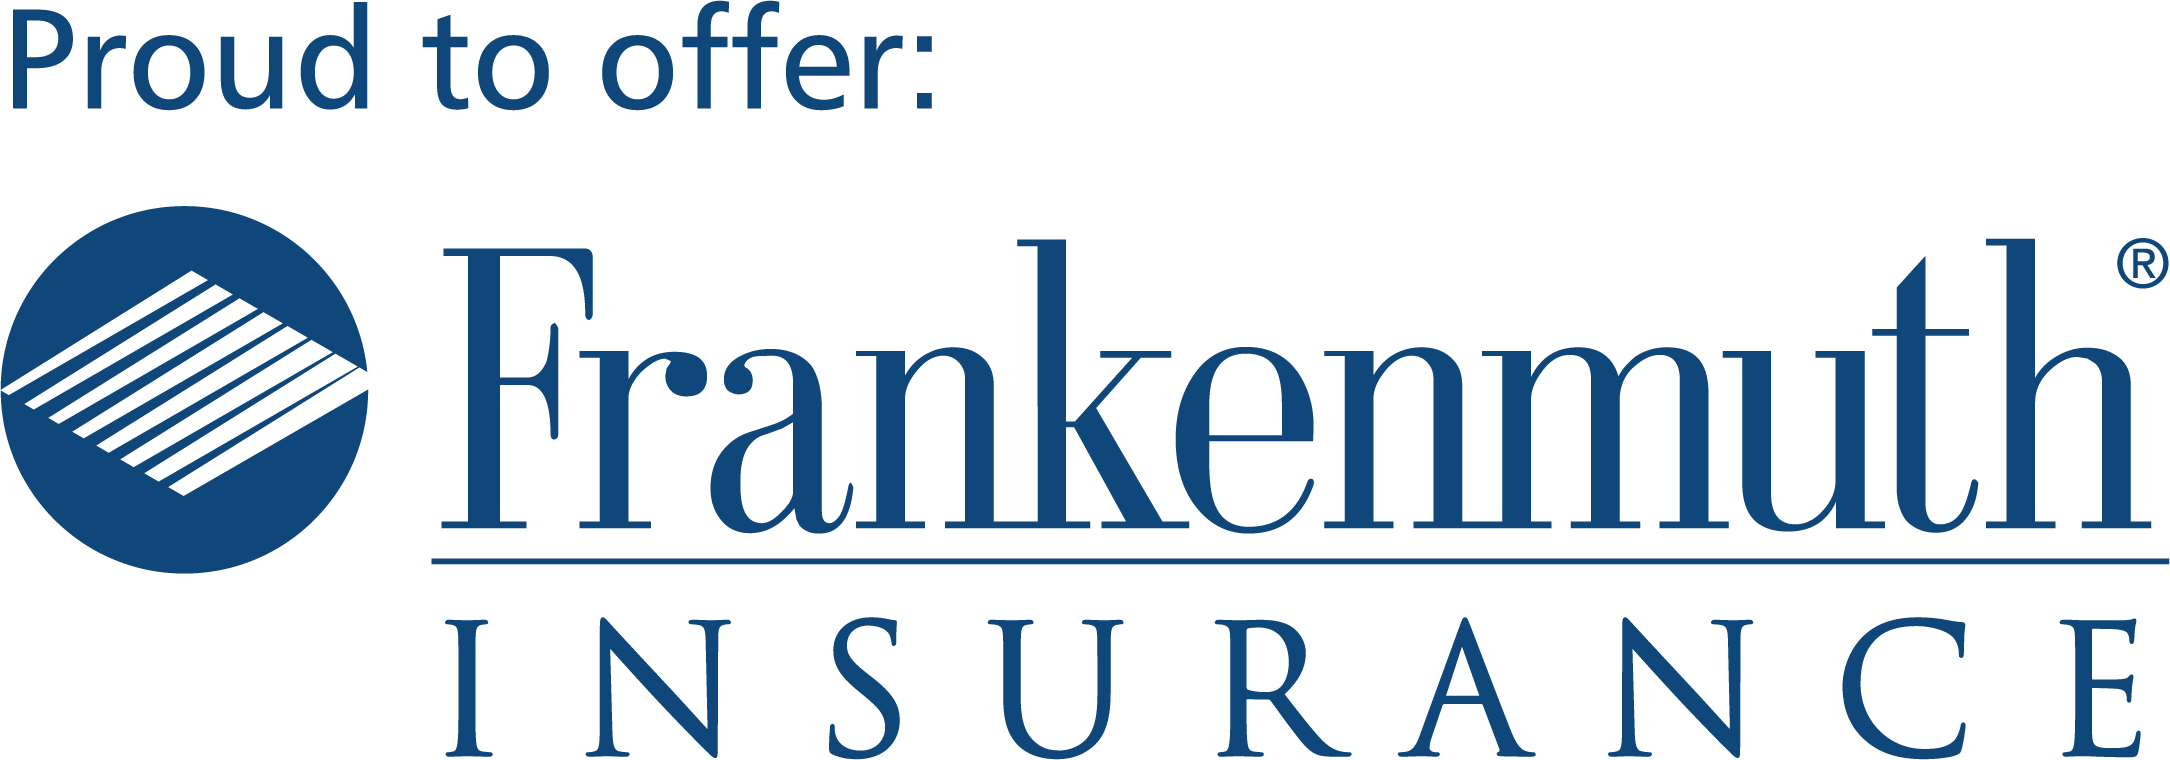 Frankenmuth Insurance_Outdoor_Proud to Offer